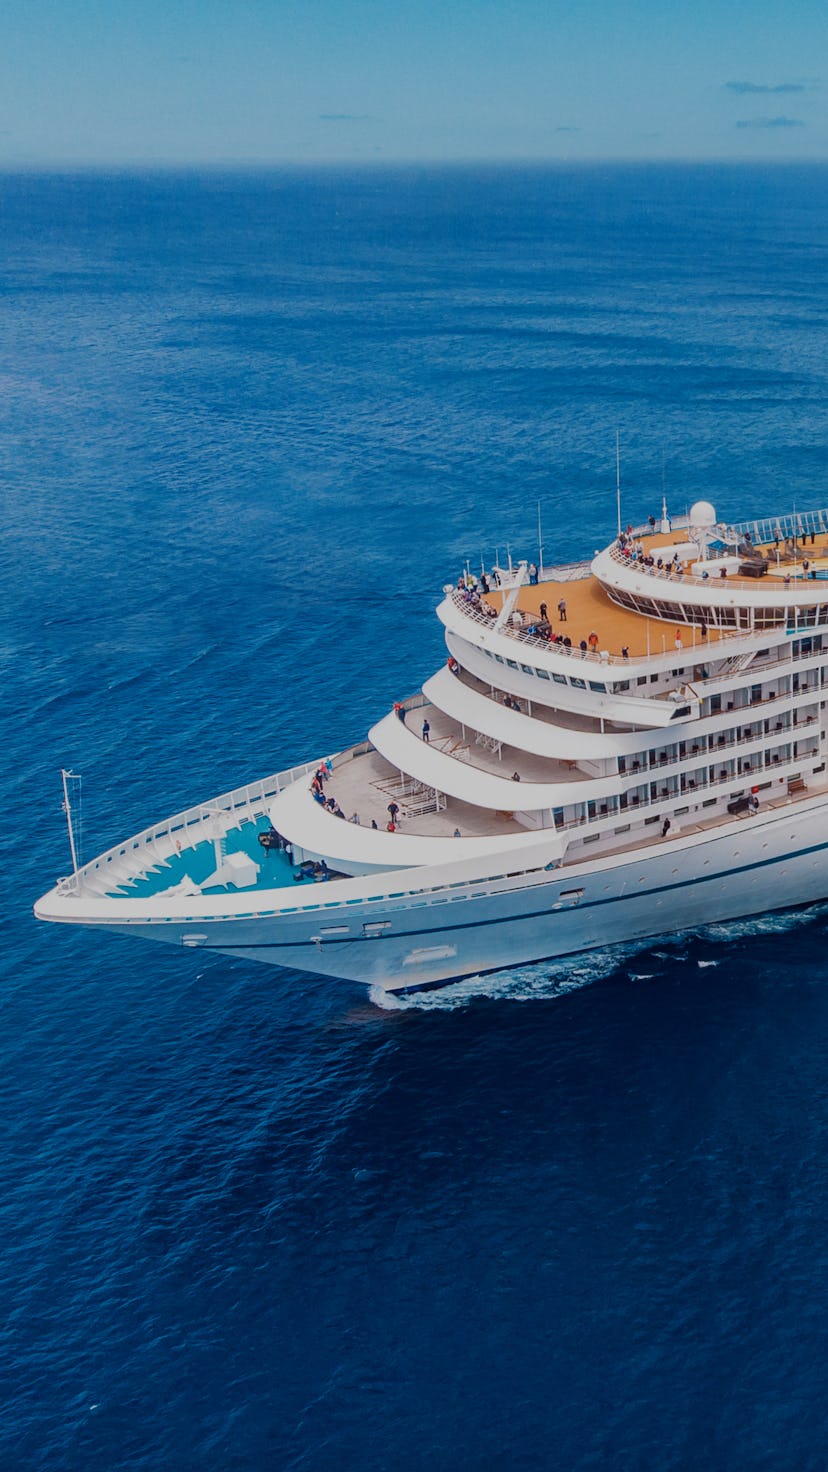 Cruise liner ship in ocean with blue sky. Aerial top view.